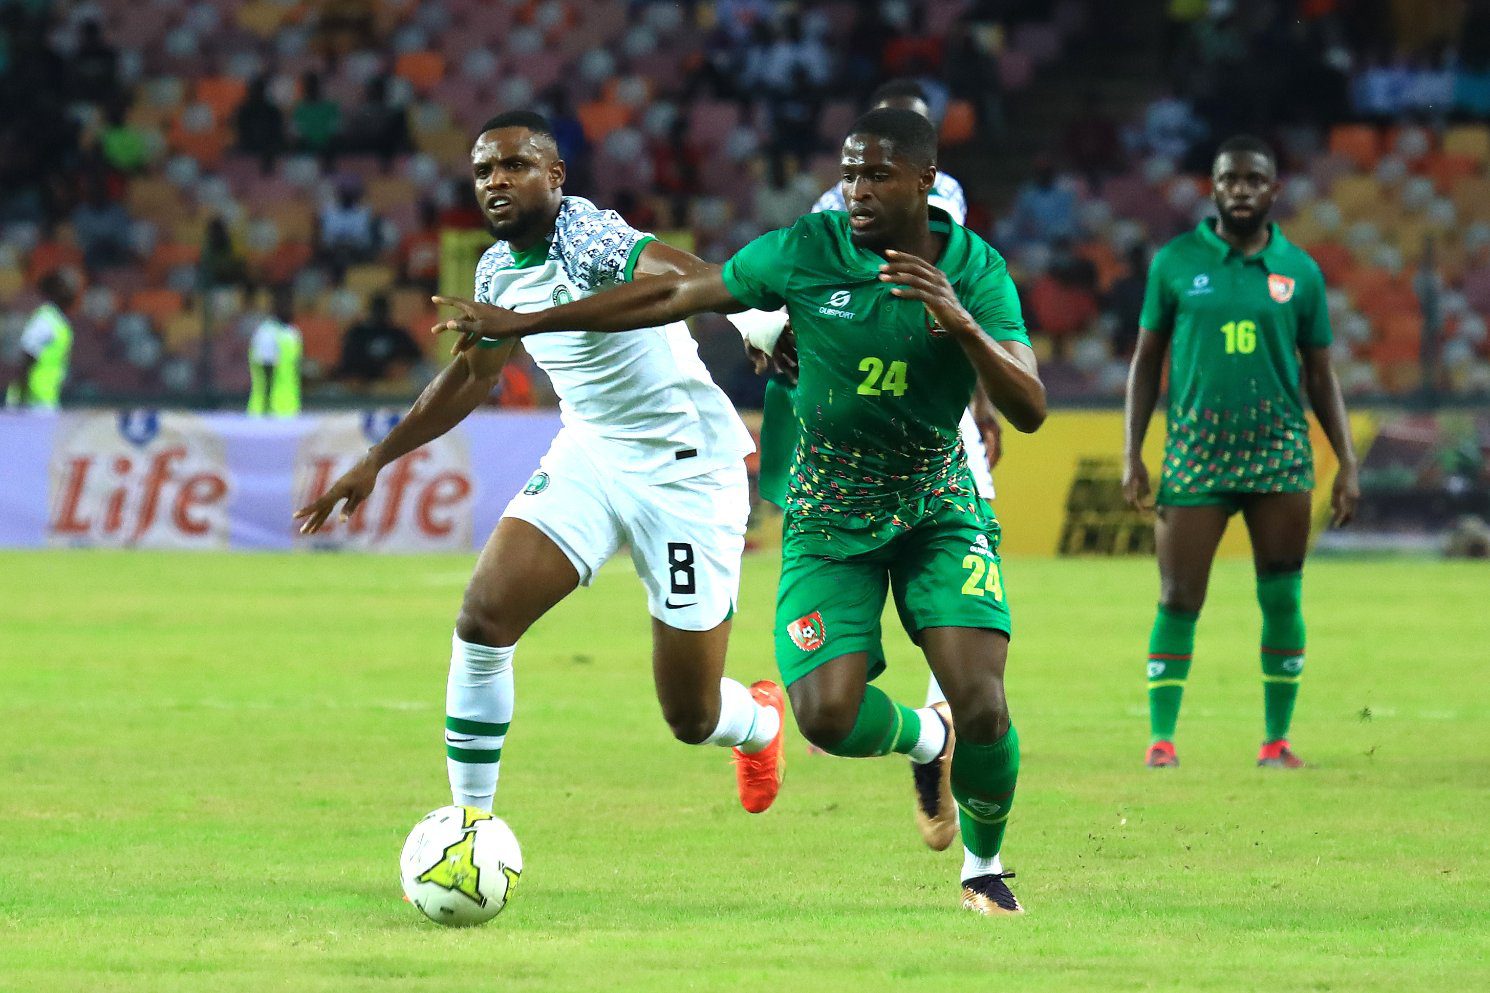 Simon, Osayi-Samuel star as Super Eagles defeat Guinea Bissau away from home